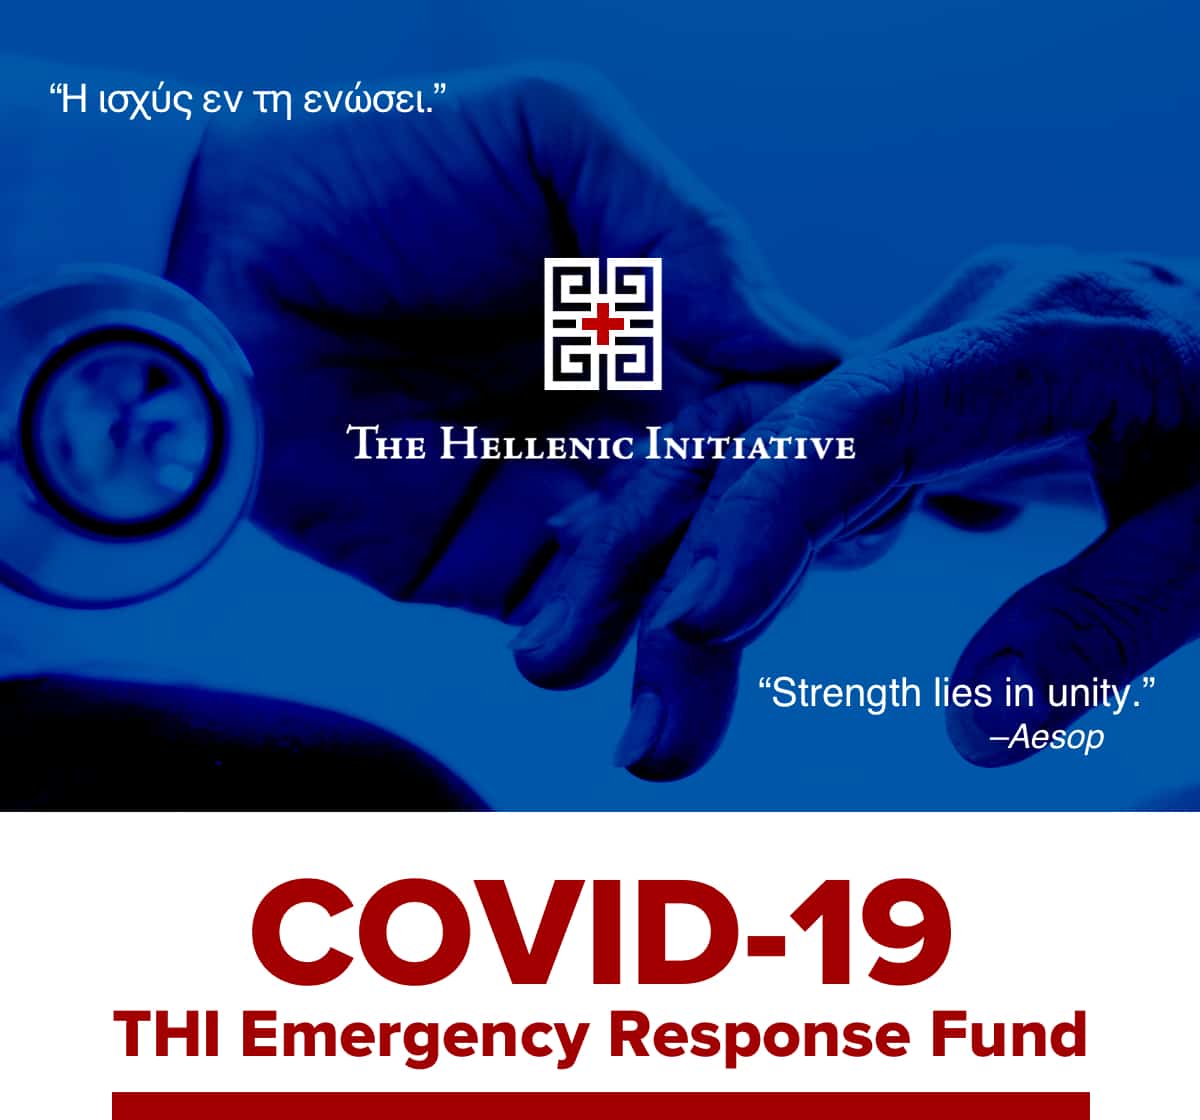 The Hellenic Initiative raises $100K for Covid-19 response in Greece